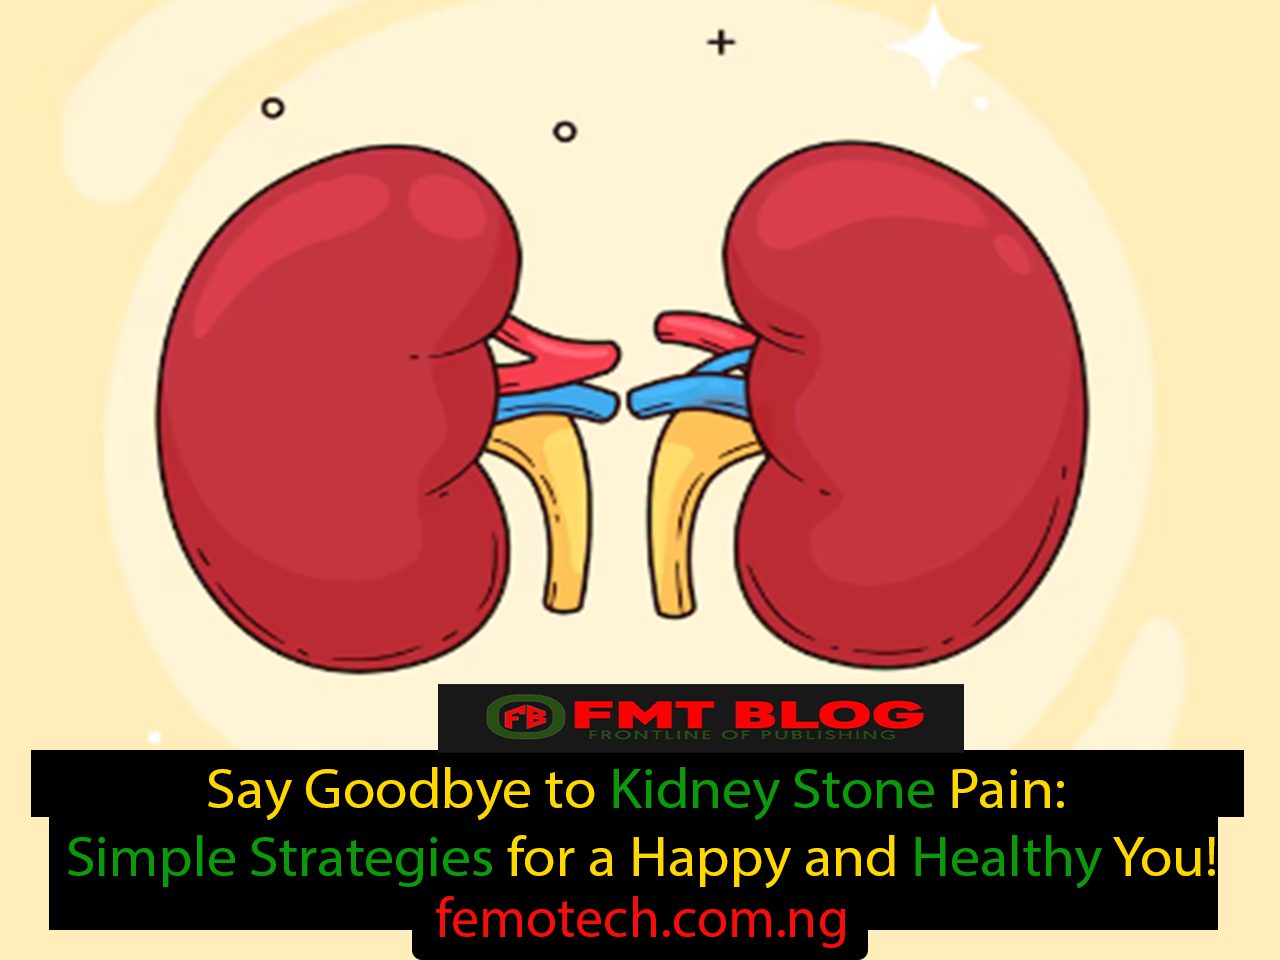 Say Goodbye to Kidney Stone Pain: Simple Strategies for a Happy and Healthy You!